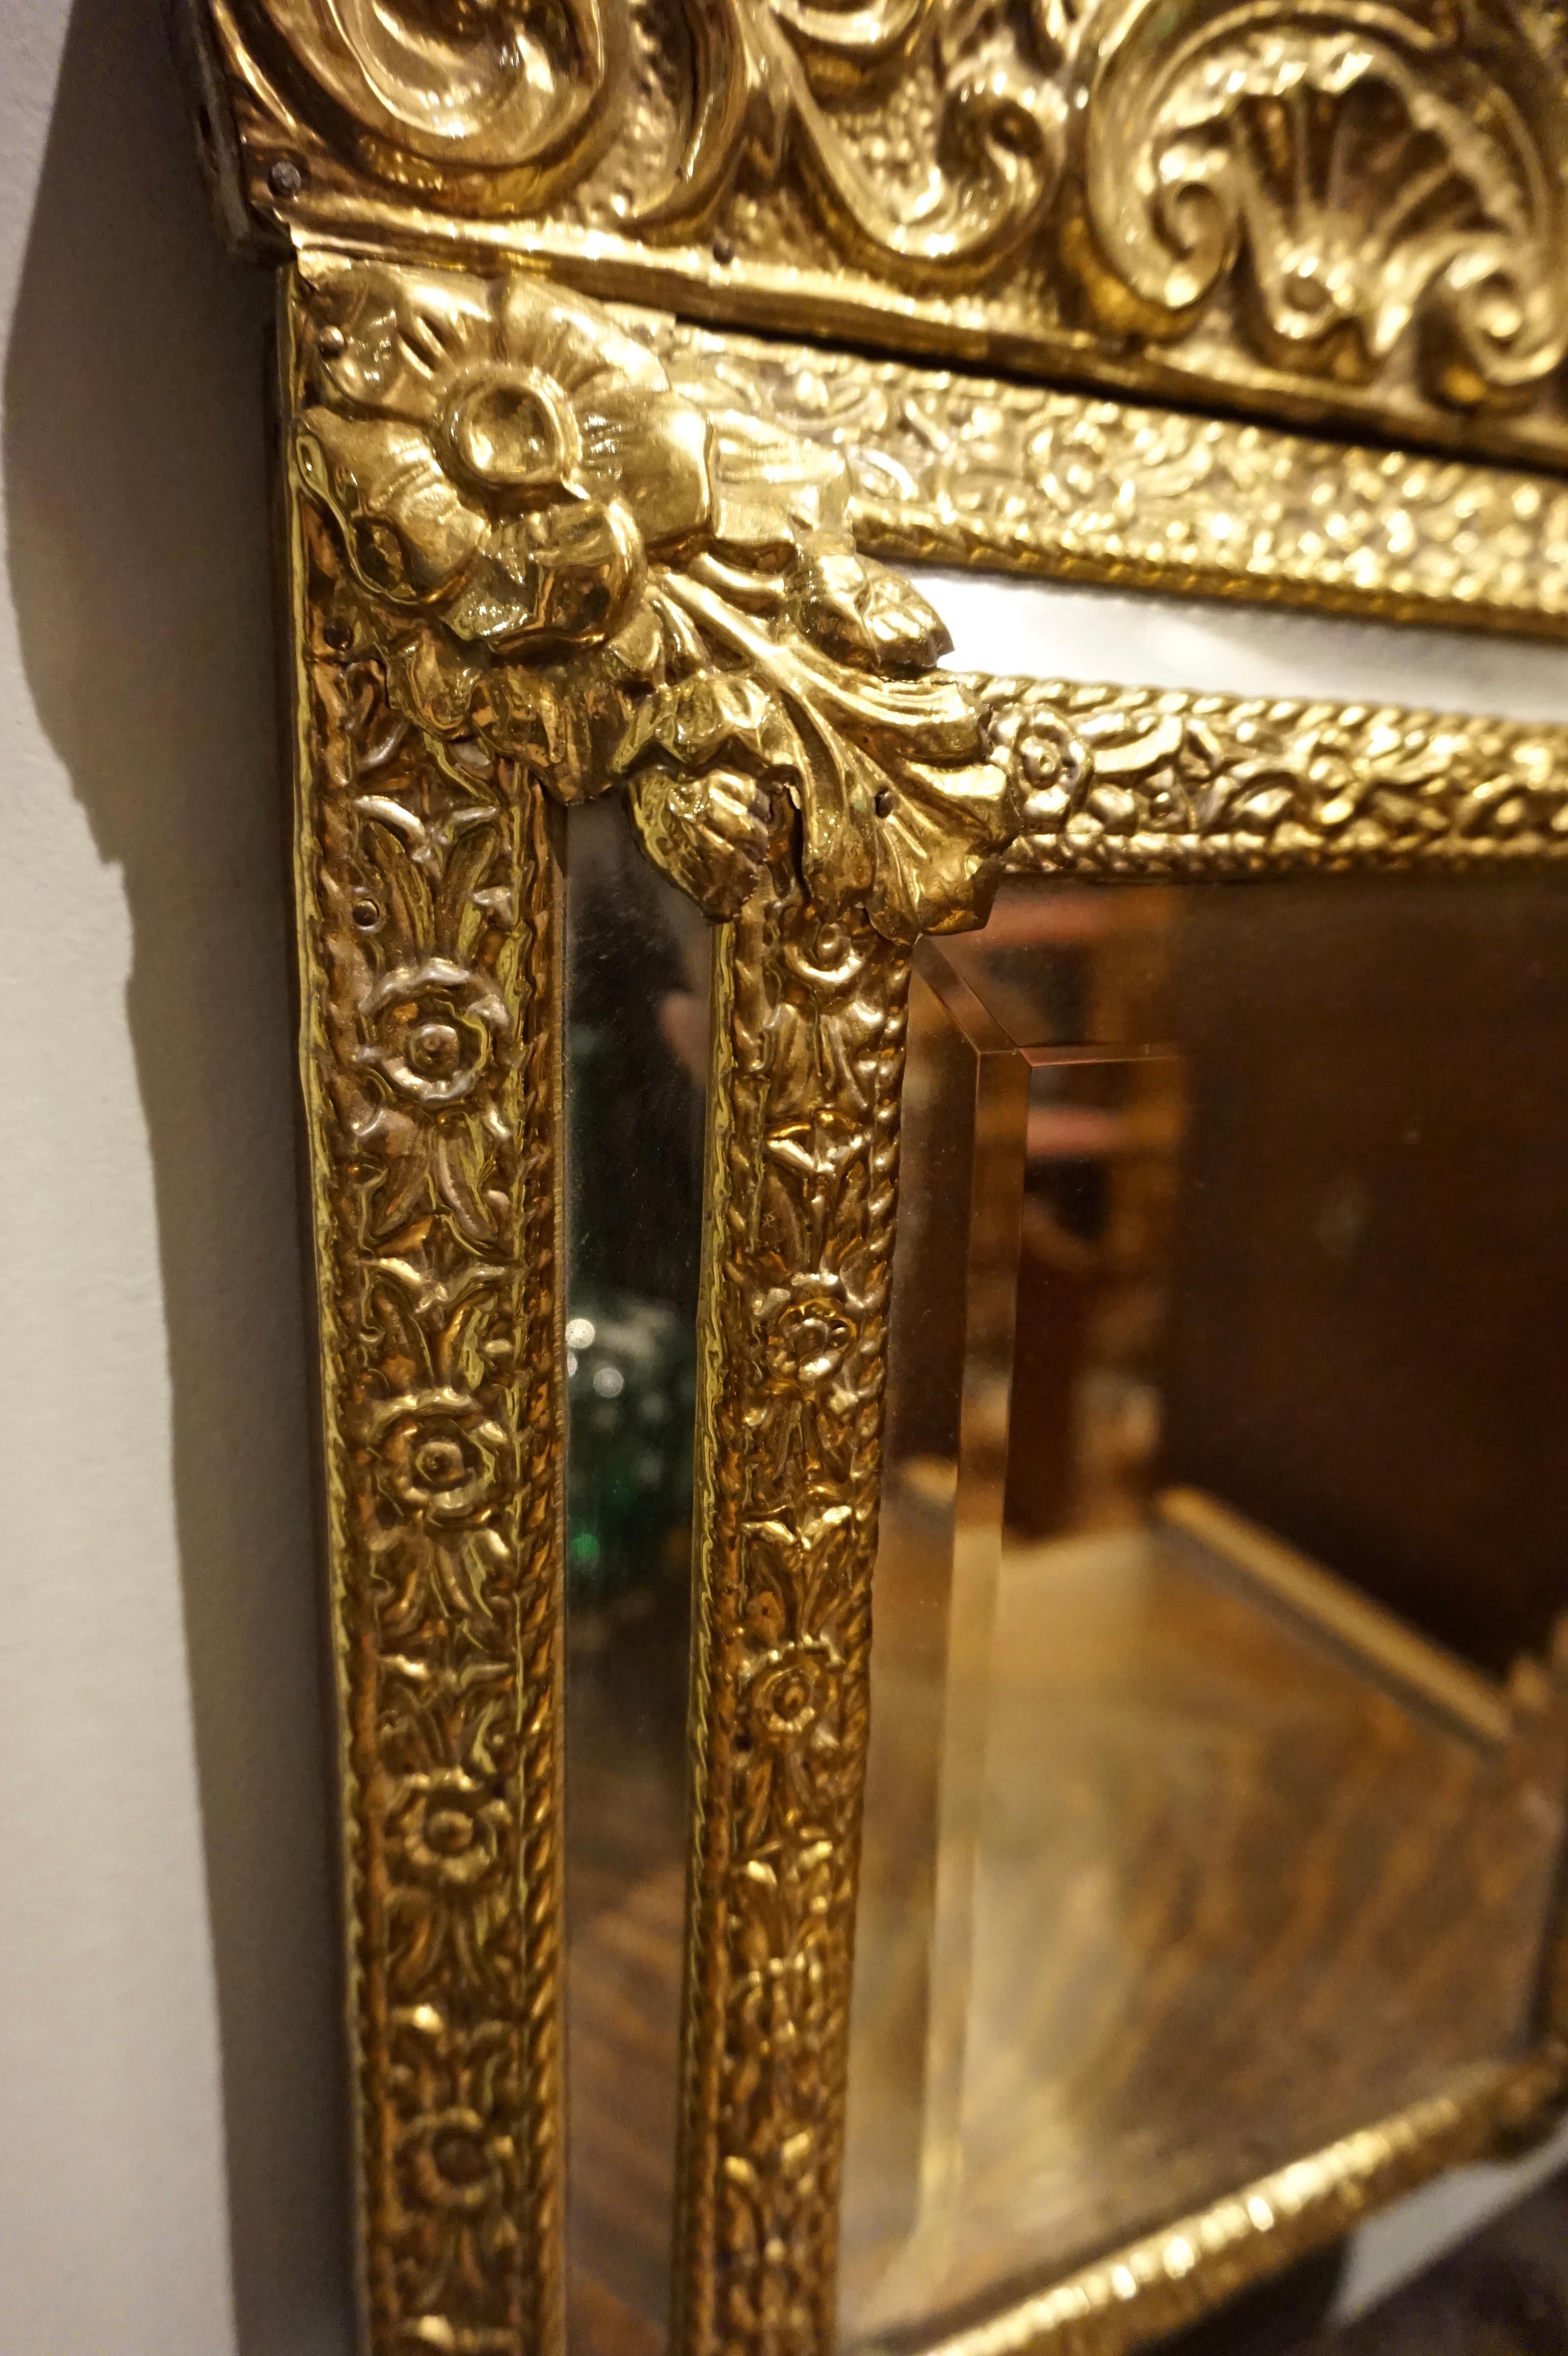 Hand-Crafted 19th Century Ornate Brass Repousse Napoléon III Mirror France For Sale